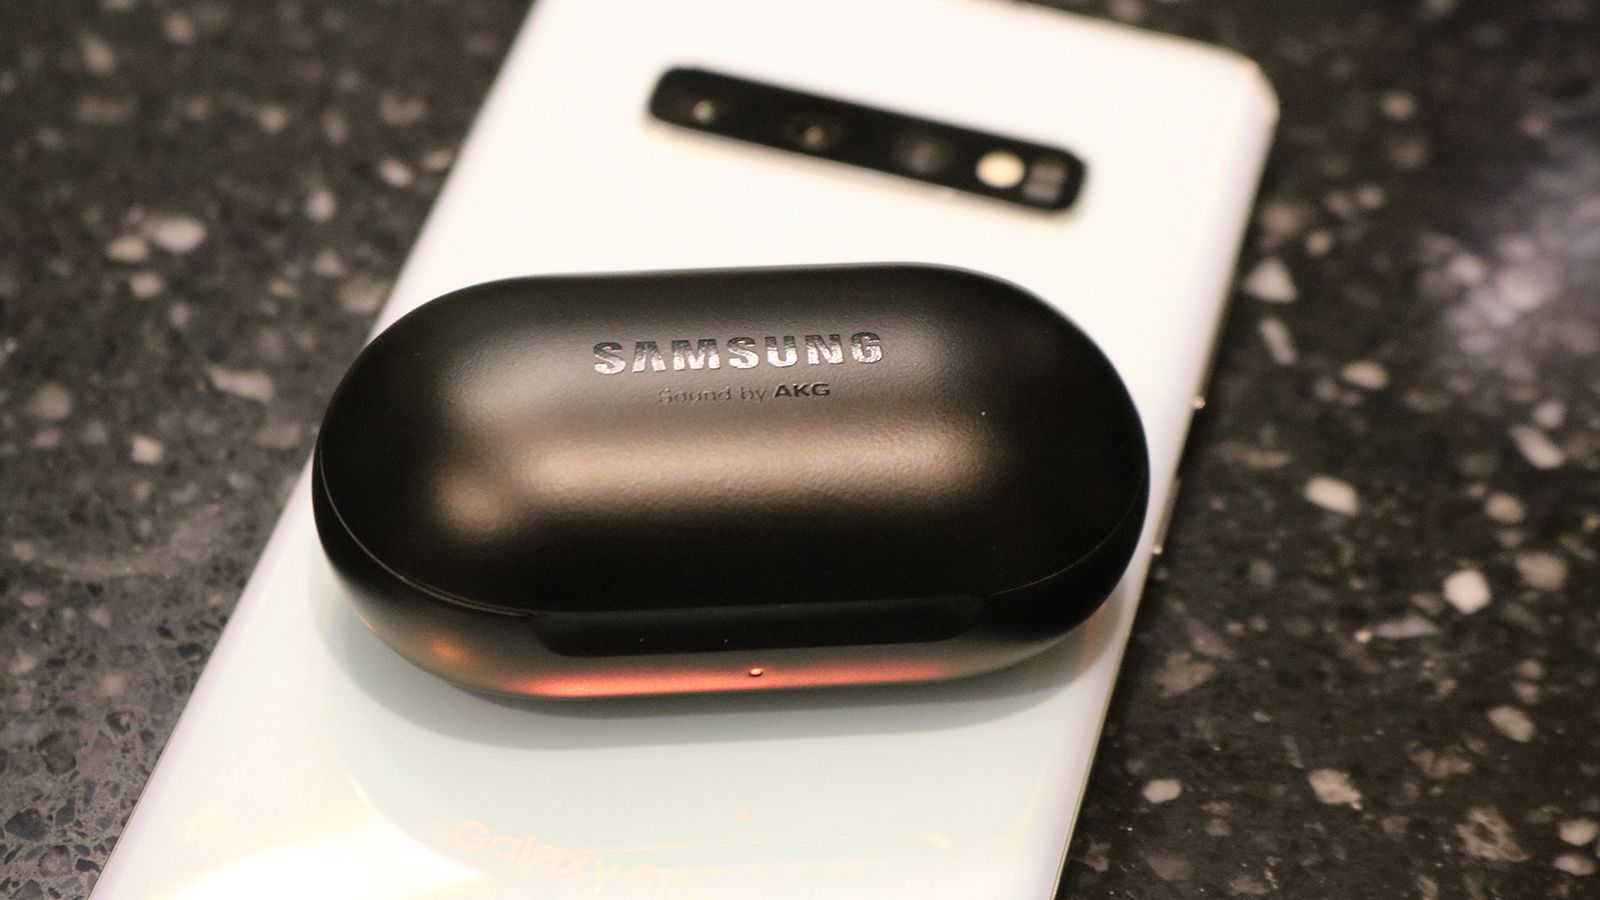 Samsung Galaxy Buds: impressions from an AirPods user - 9to5Mac